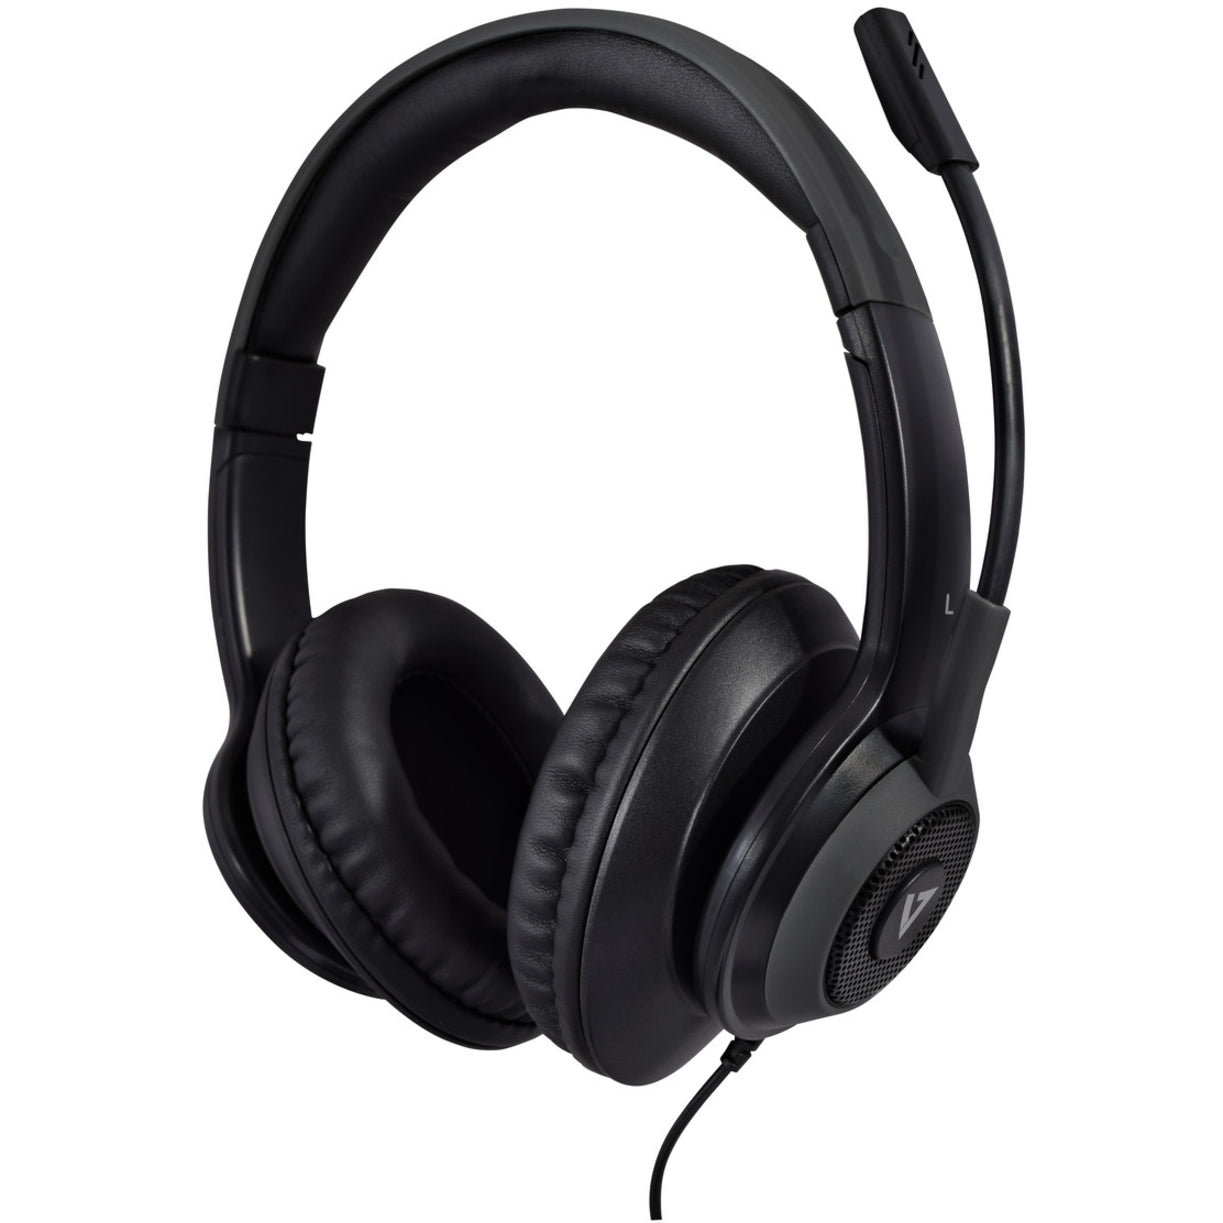 V7 Premium Over-Ear Stereo Headset with Boom Mic